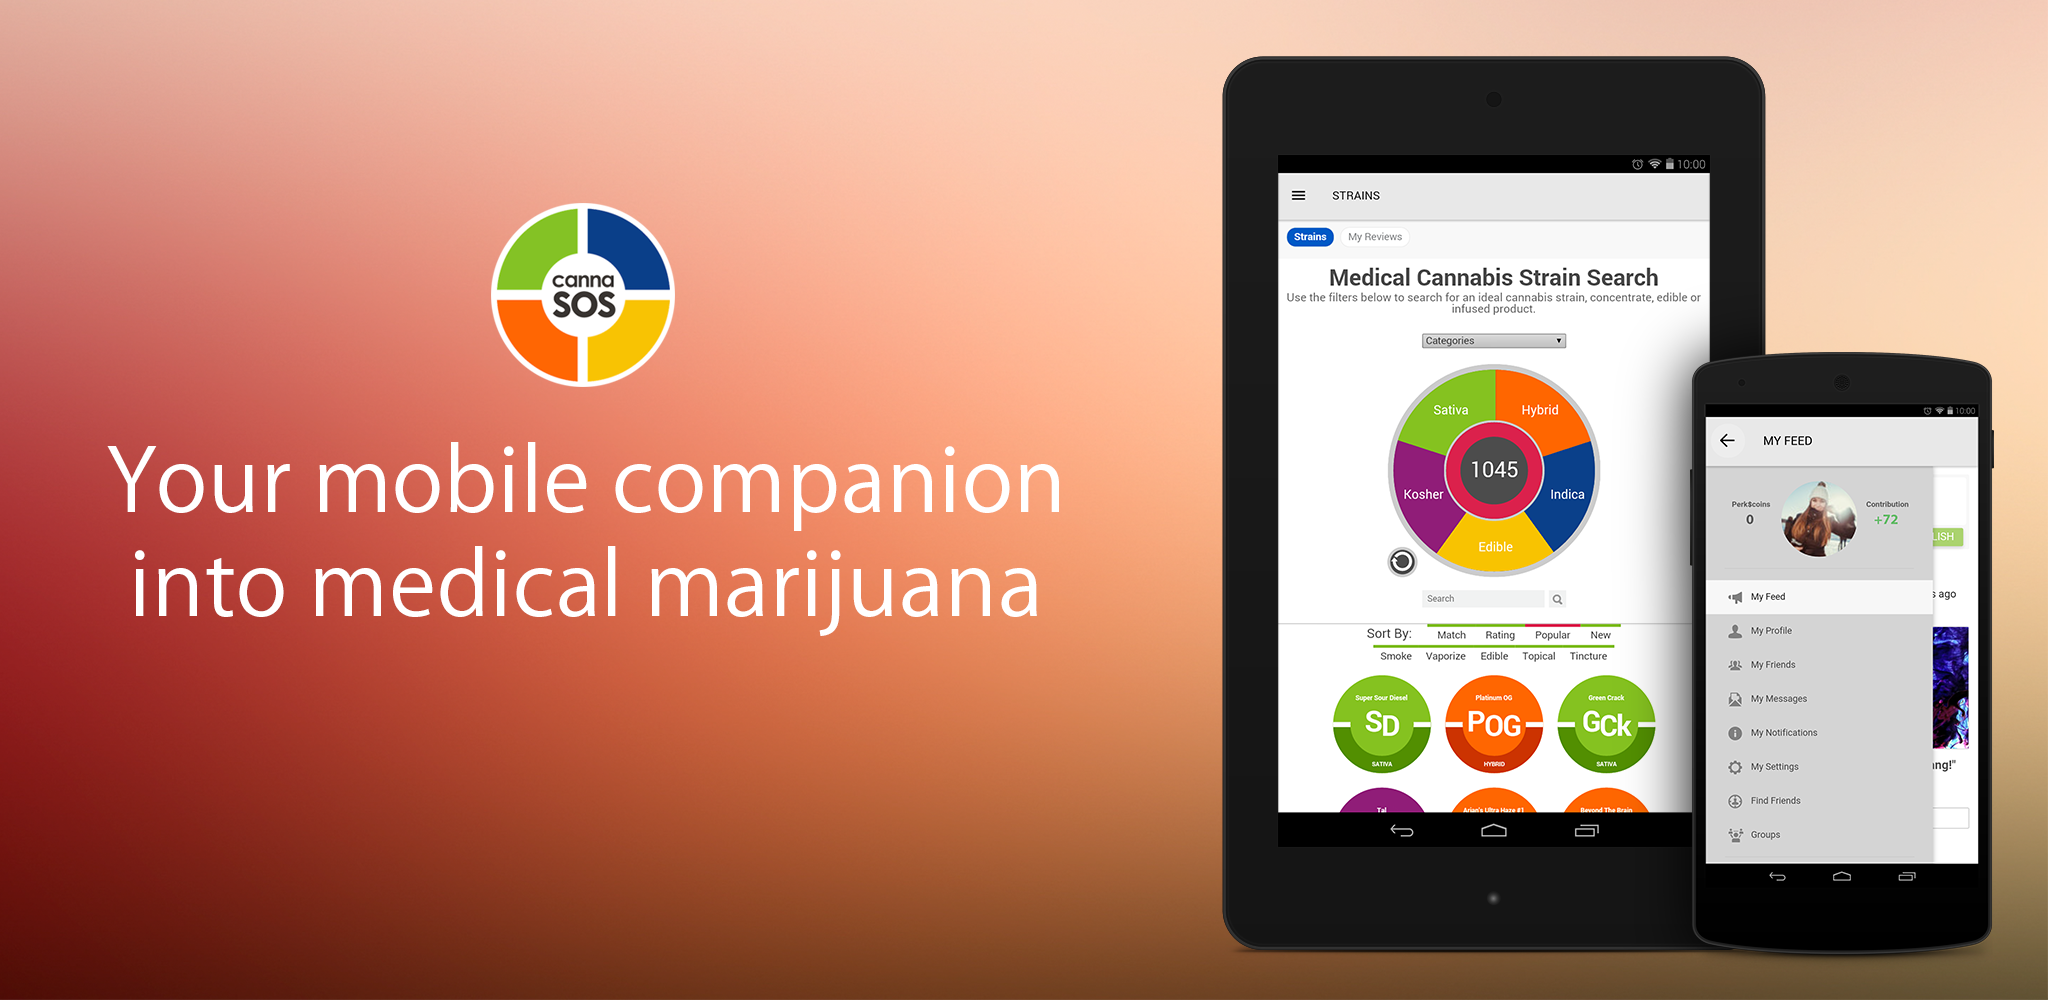 CannaSOS has launched an Android app